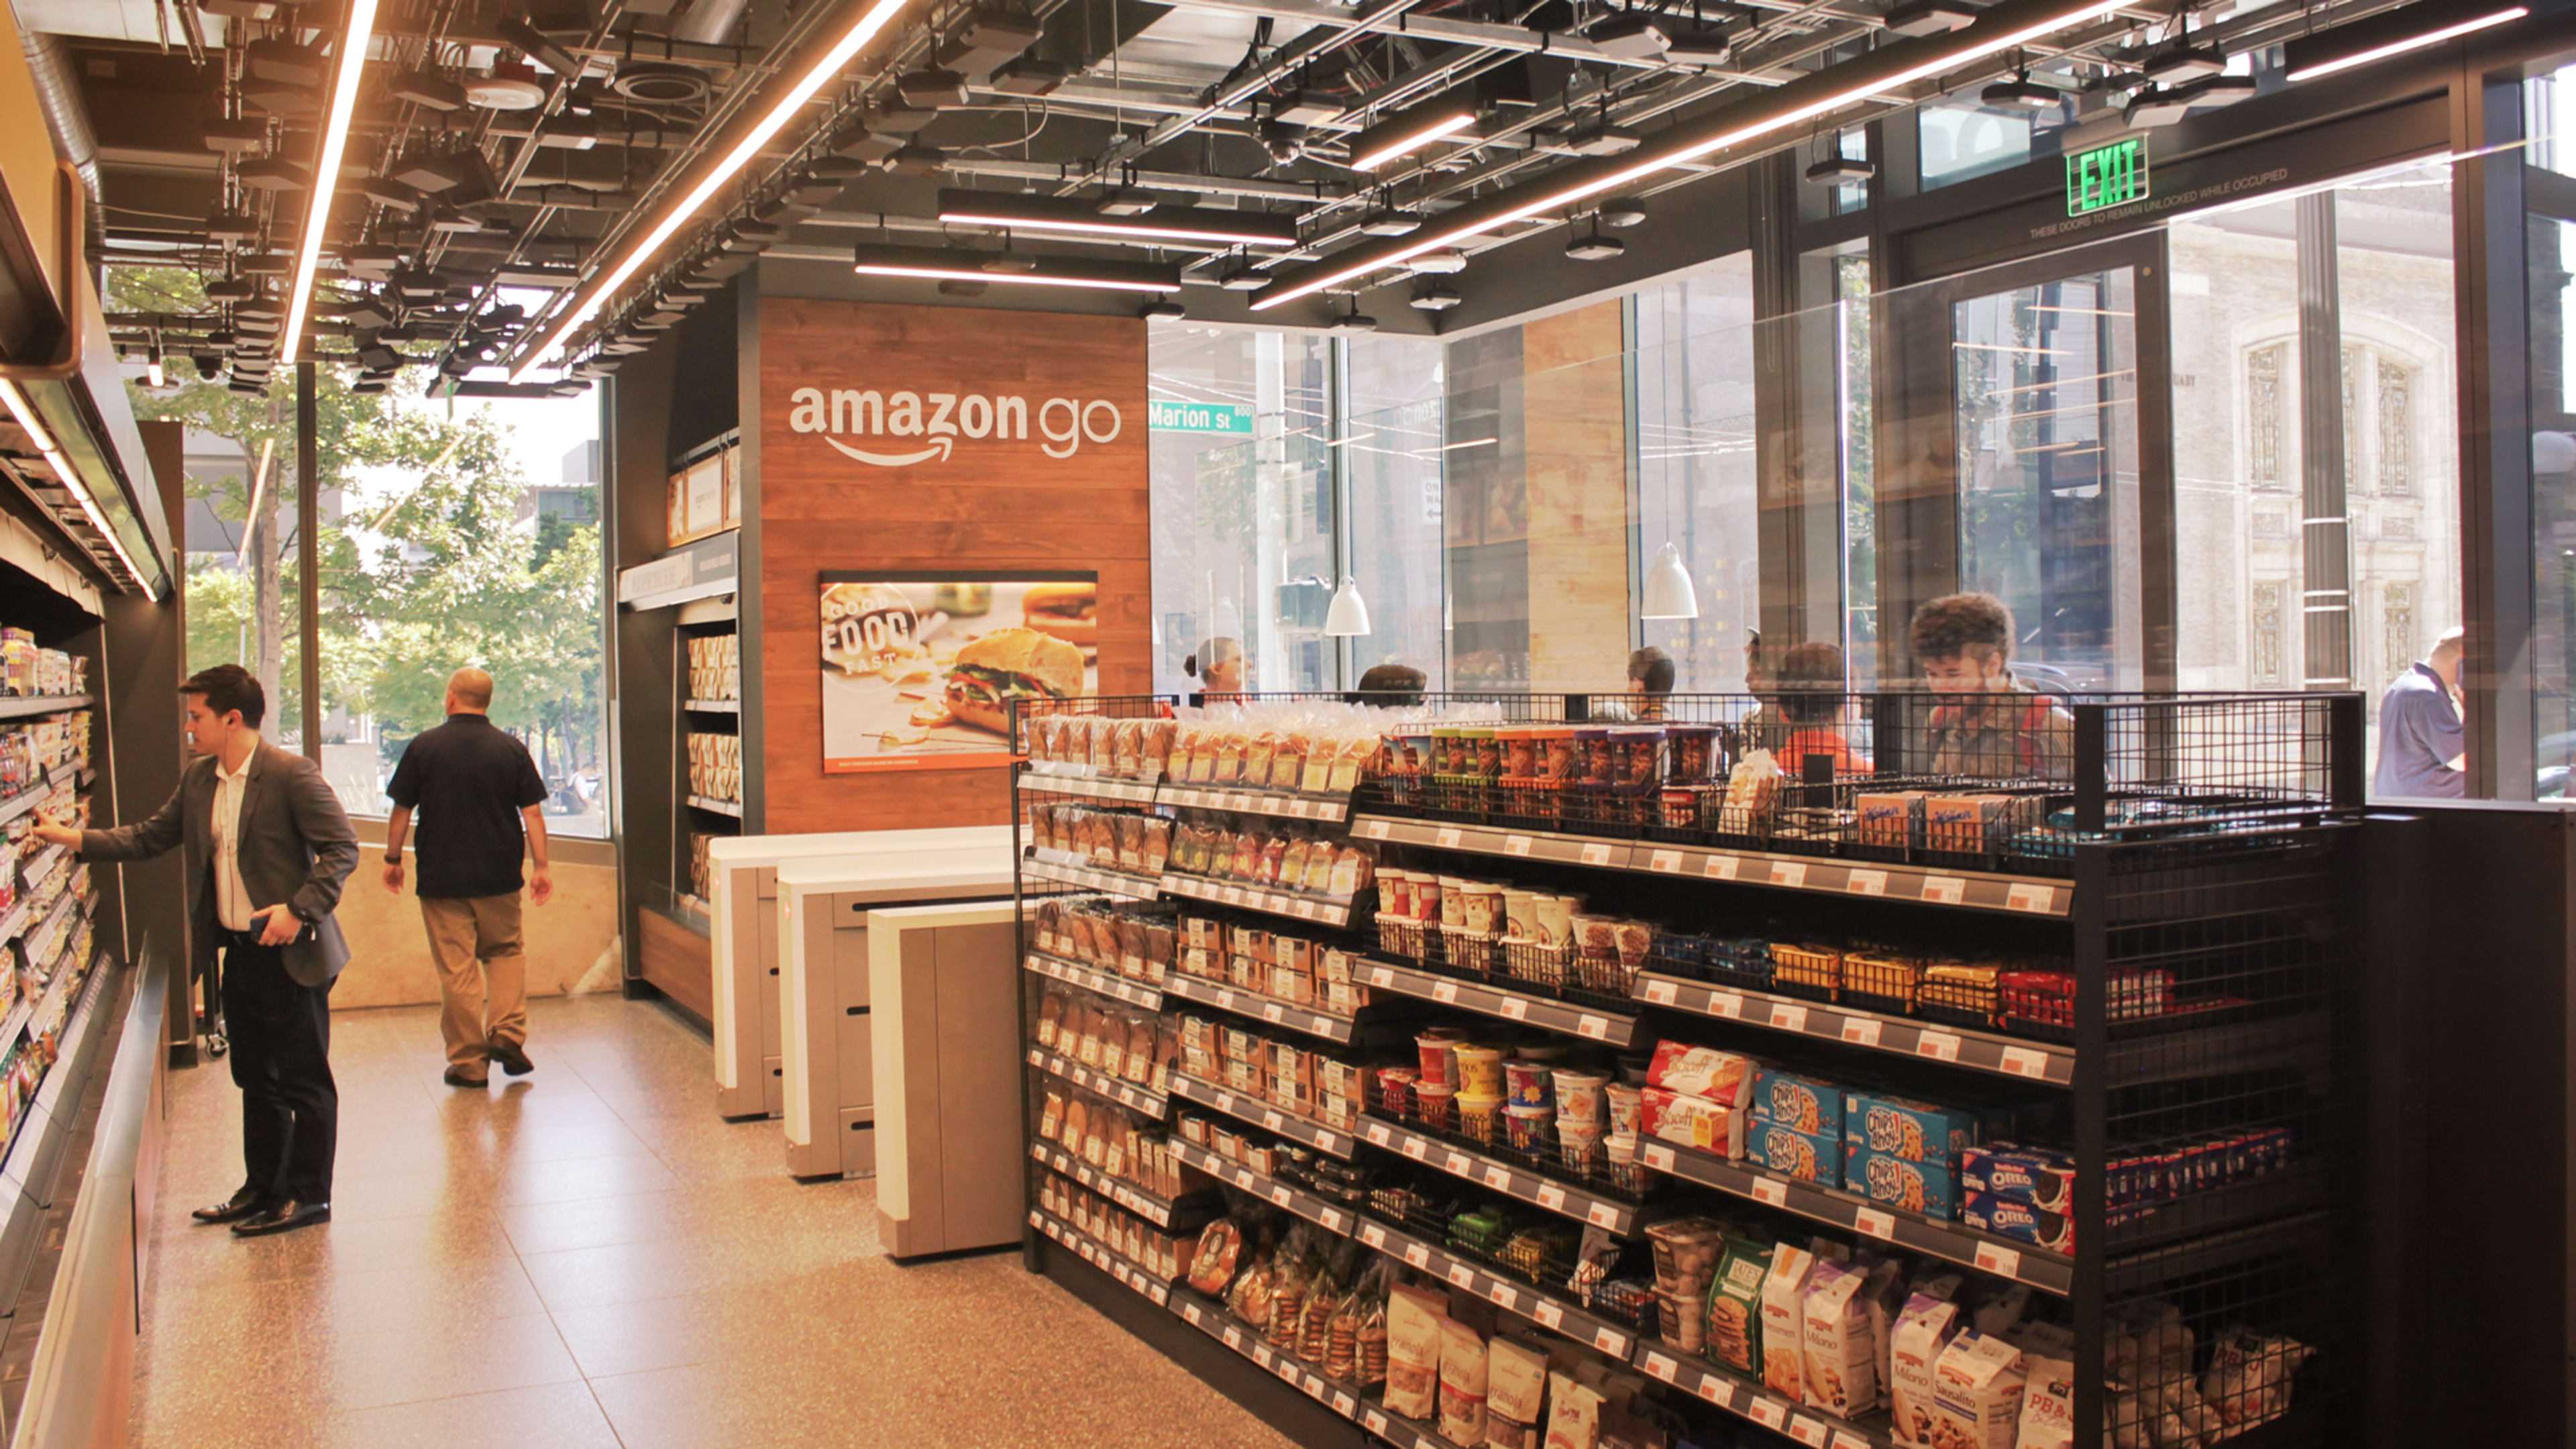 Amazon planning to open a flagship Go store in London